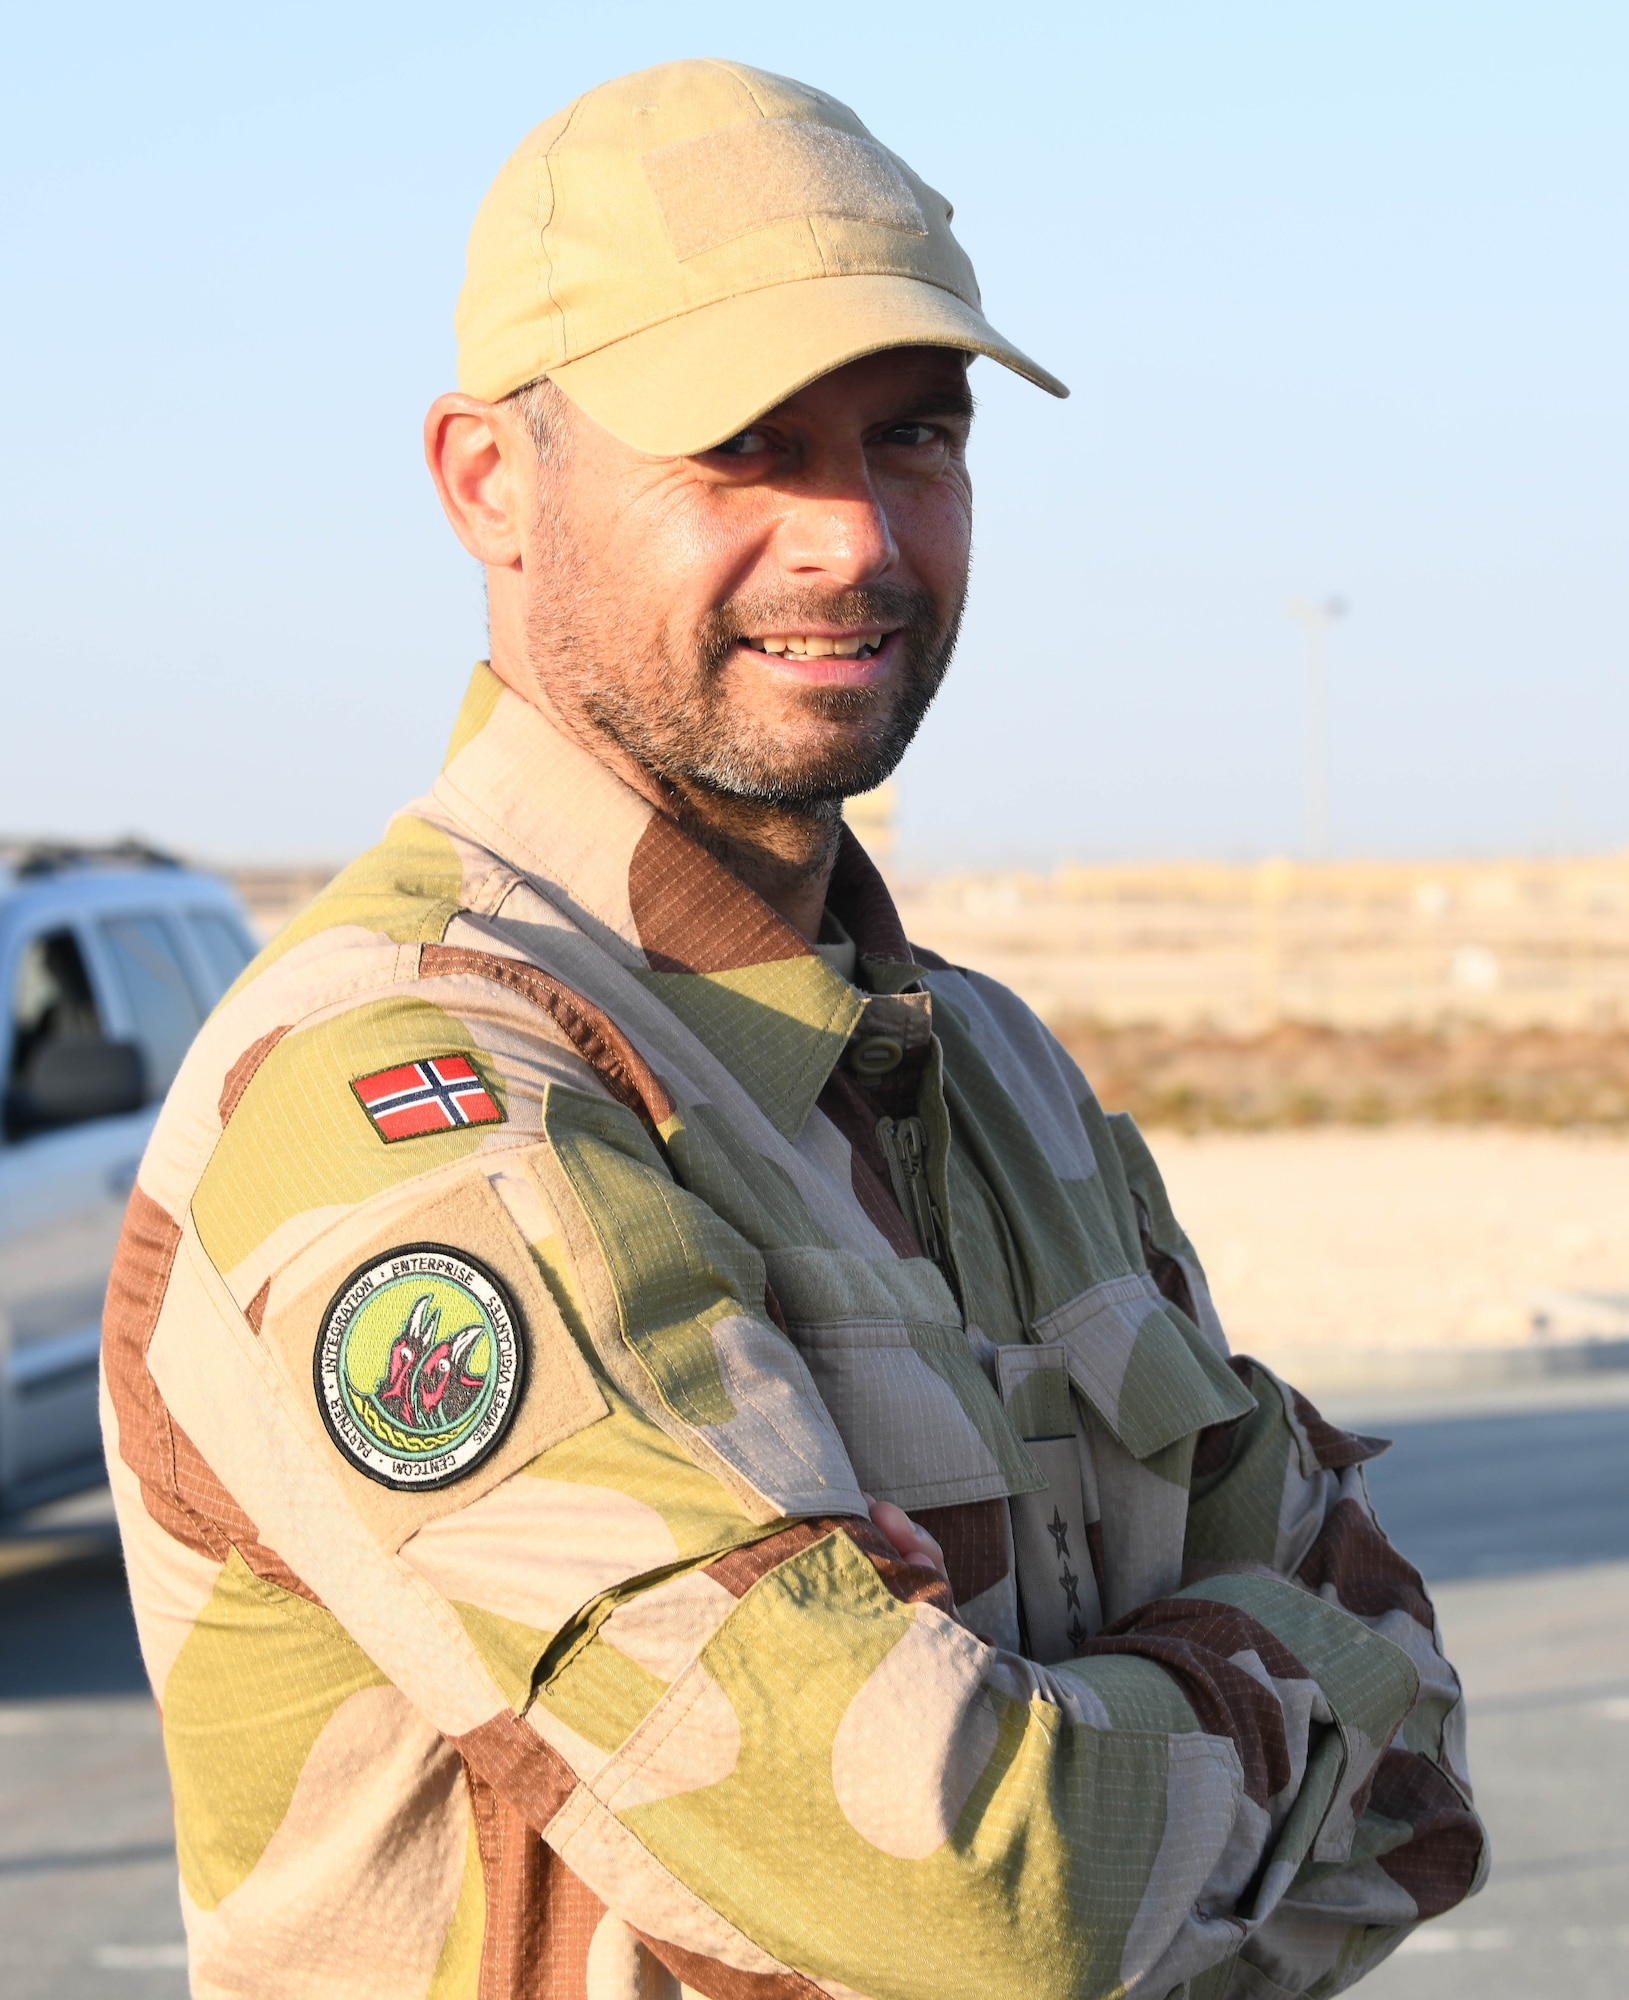 Norwegian armed forces Capt. Magne Rambo, deployed to Al Udeid Air Base, Qatar, as part of the U.S. Central Command Partner Integration Enterprise, poses for a photo at the Norwegian foot march progress checkpoint Dec. 5, 2020. Rambo supervised the event, a Norwegian military tradition dating back to 1915, 10 years after their independence from Sweden, which brought together nearly 120 other coalition members, including Americans, Australians, British and Canadians, and New Zealanders for a 30-kilometer (18.6-mile) challenge. (U.S. Air Force photo by Staff Sgt. Kayla White)